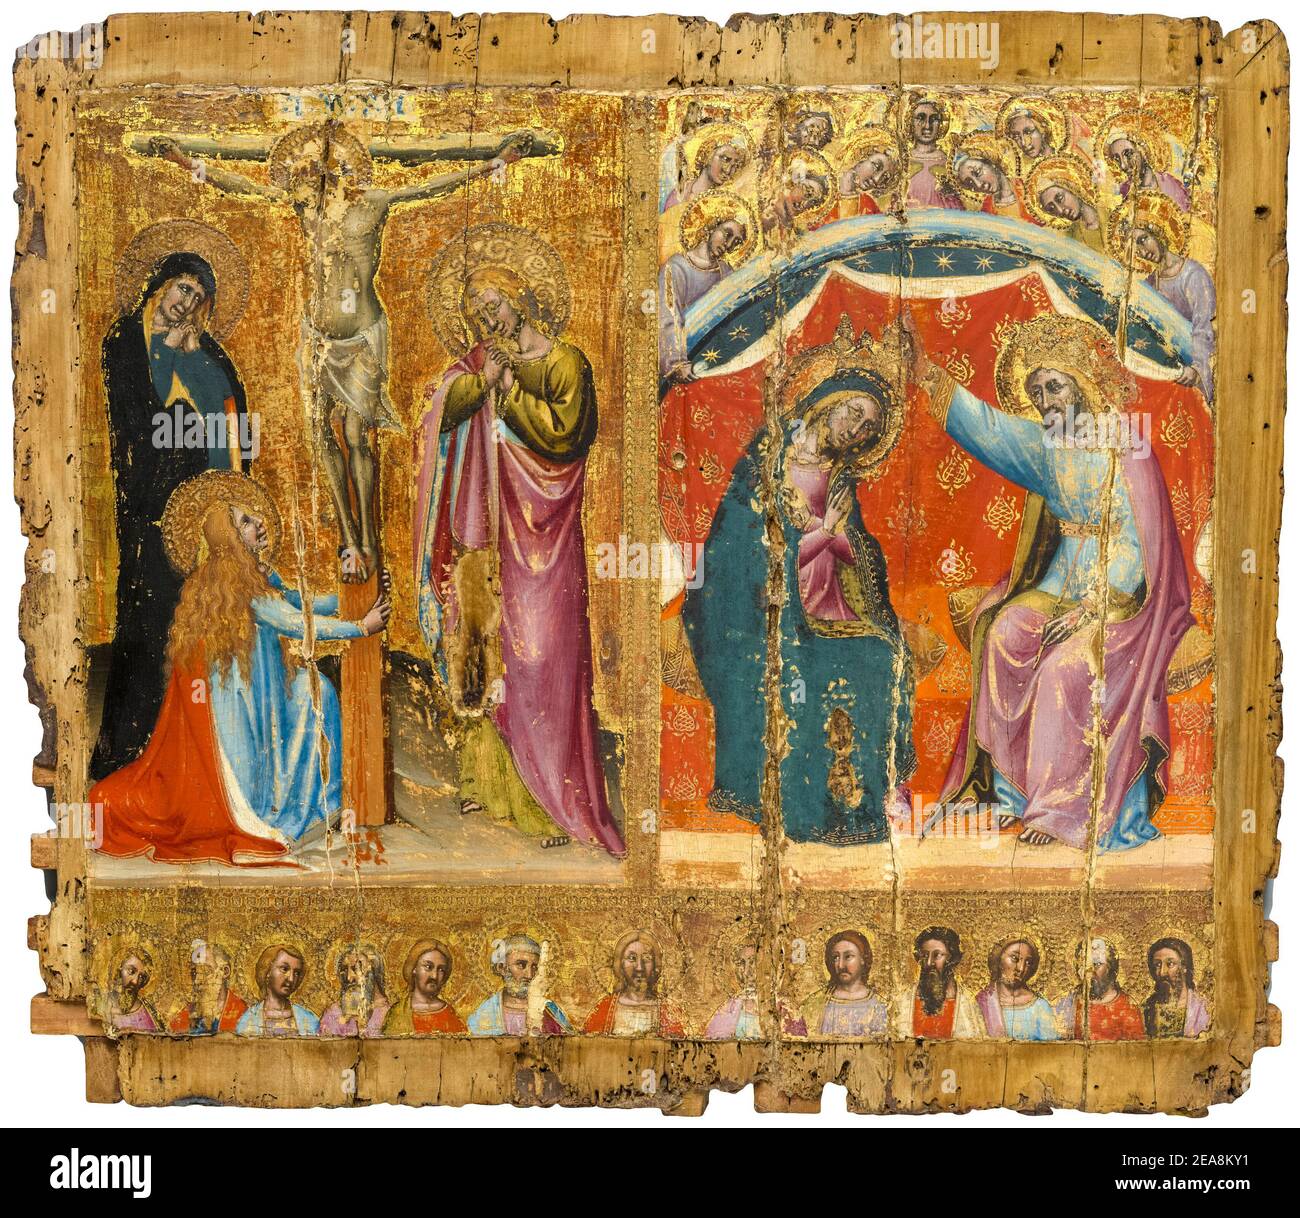 Simone dei Crocifissi, Small altarpiece showing the Crucifixion, the Coronation of the Virgin Mary, and Christ and the Apostles, painting, circa 1370 Stock Photo